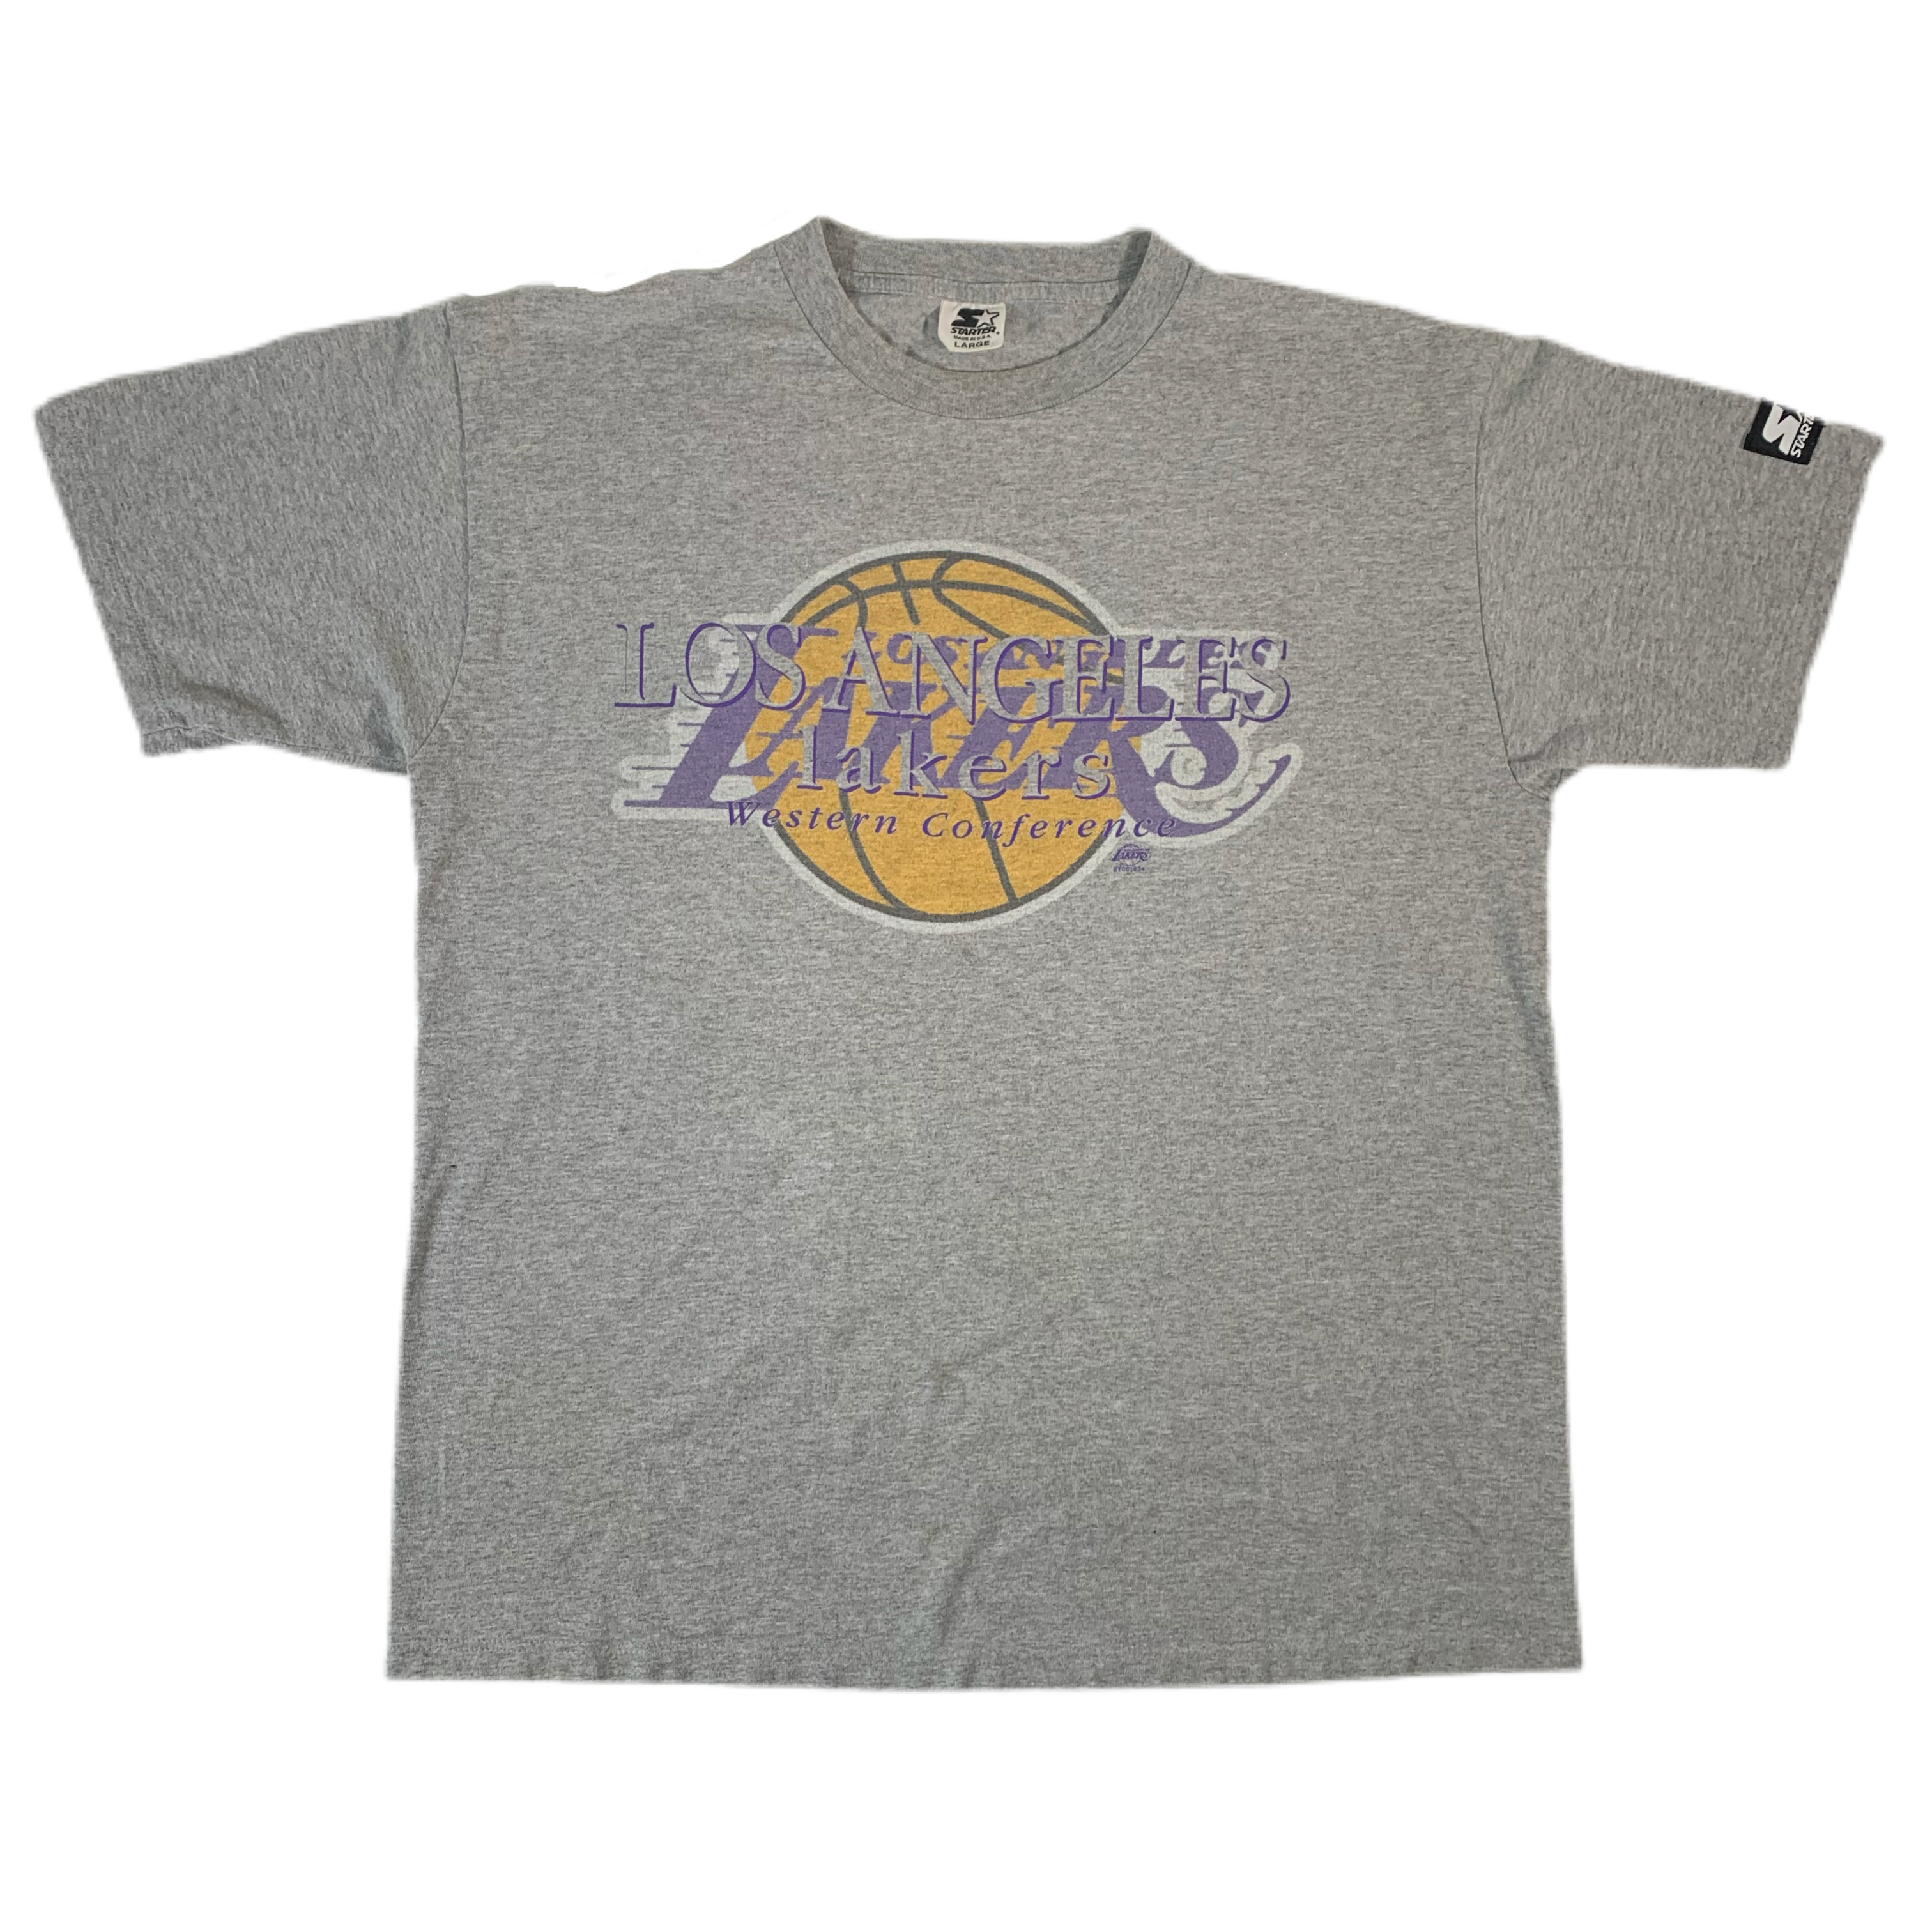 Los Angeles Lakers T-Shirts in Los Angeles Lakers Team Shop